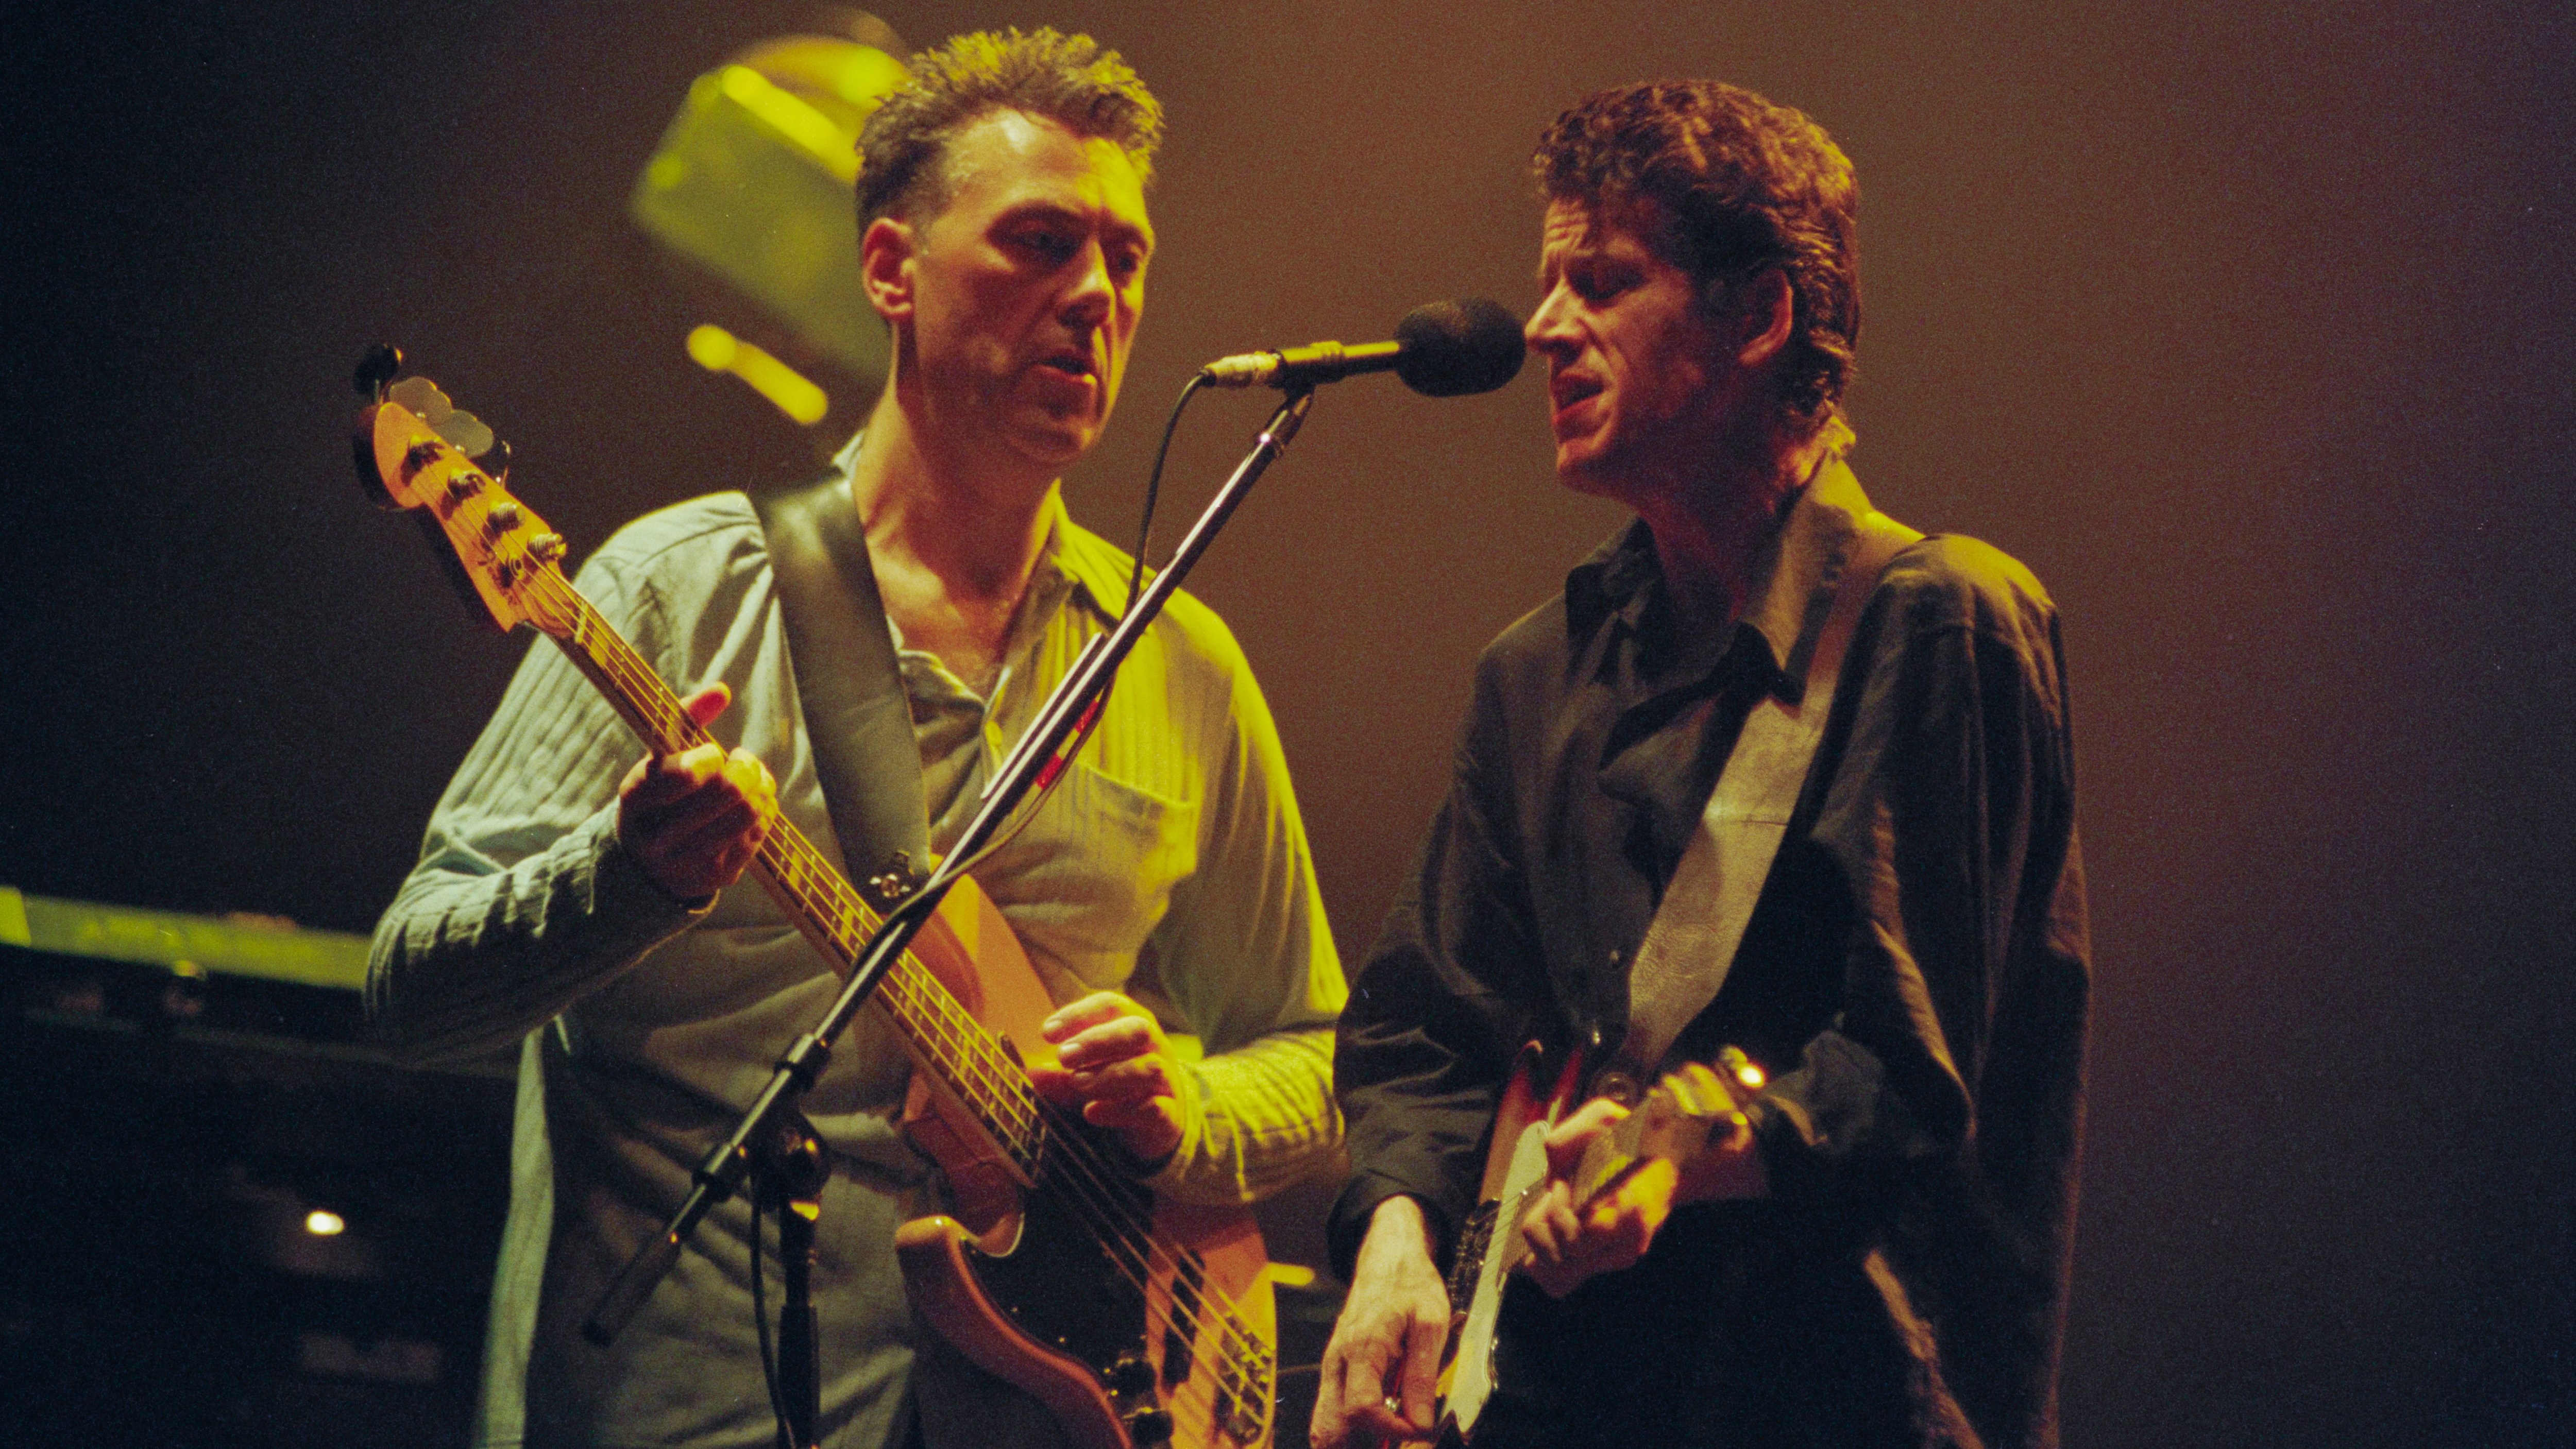 Robert Bell and Paul Buchanan, of the Blue Nile, perform in 1996. Taylor Swift referenced their 1989 single The Downtown Lights on Guilty as Sin?, the ninth track of her latest album